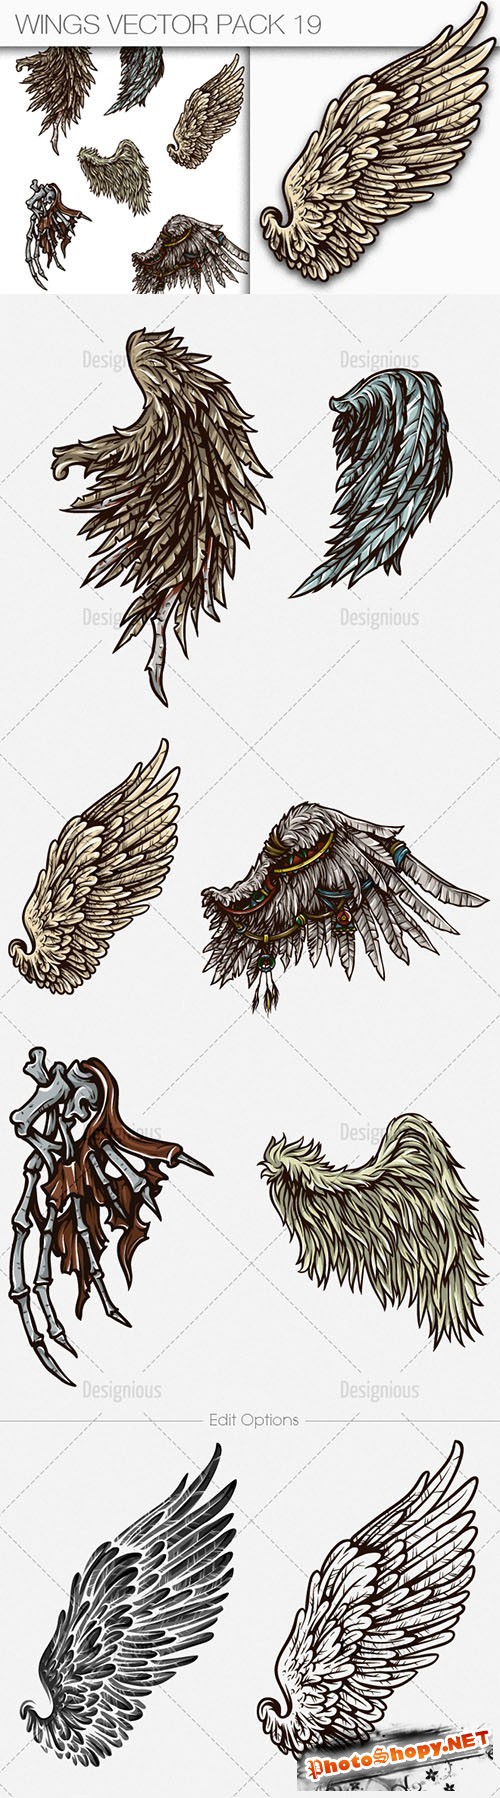 Wings Vector Illustrations Pack 19